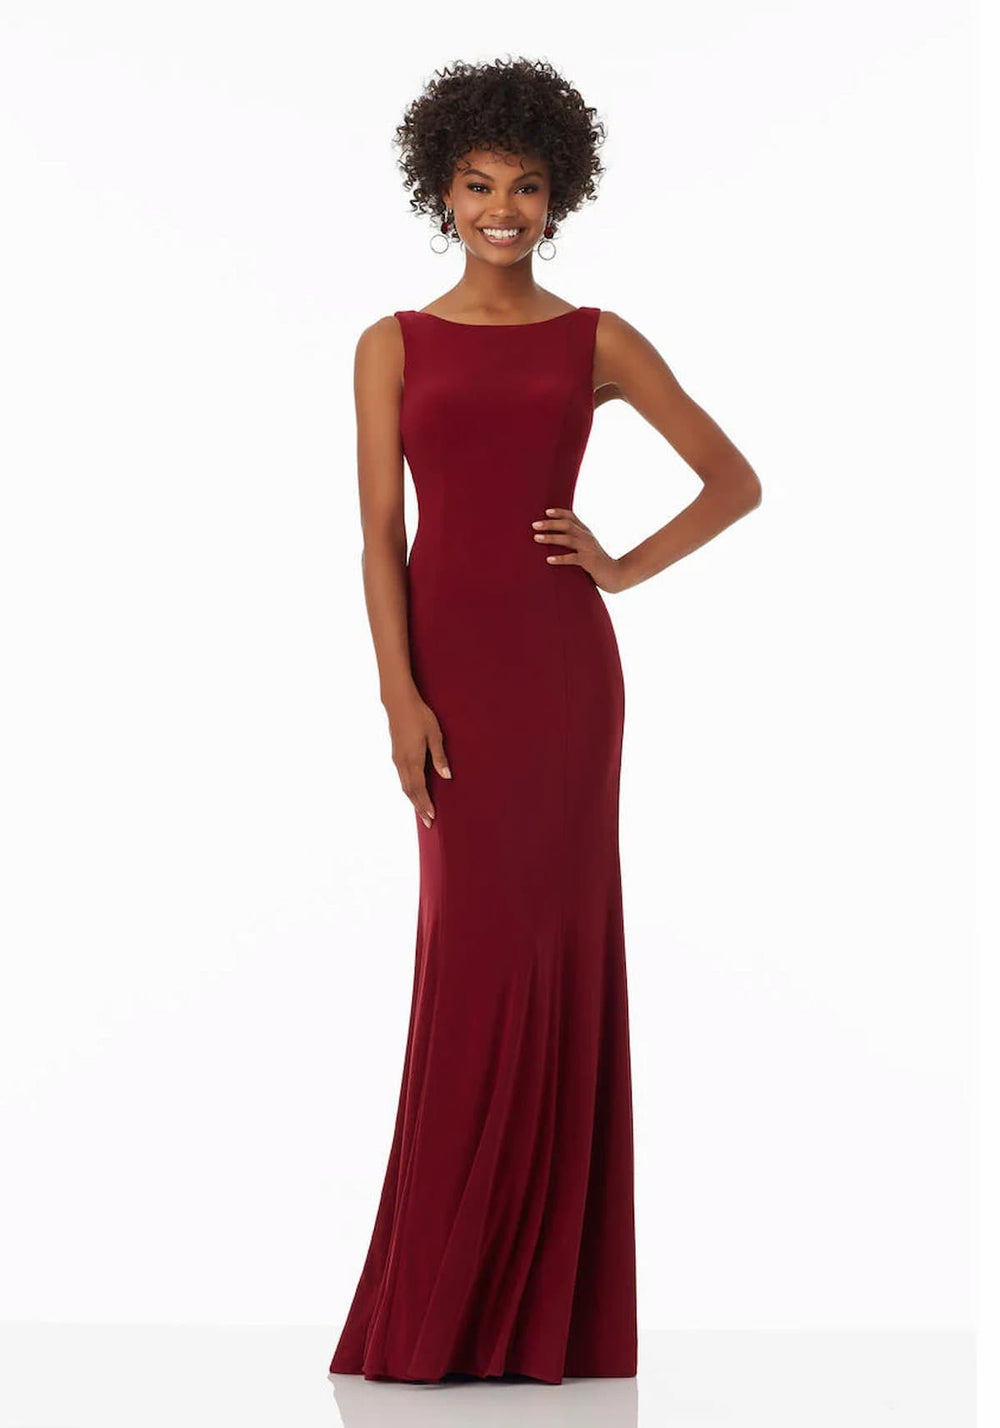 Front view of Morilee 99053 Prom Dress in colour bordeaux.